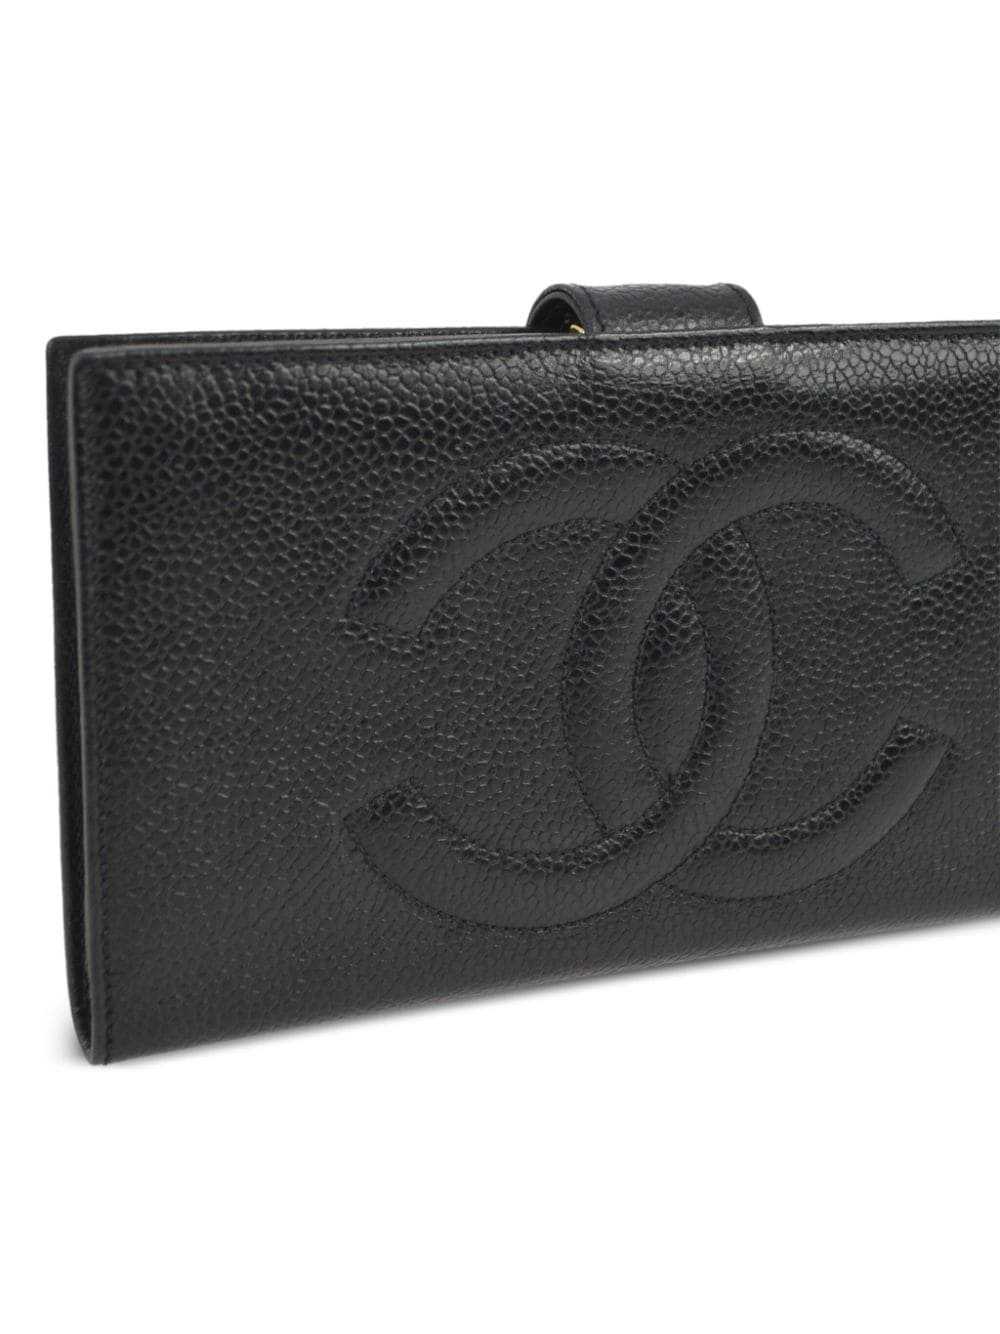 CHANEL Pre-Owned 1997 CC Long leather wallet - Bl… - image 3